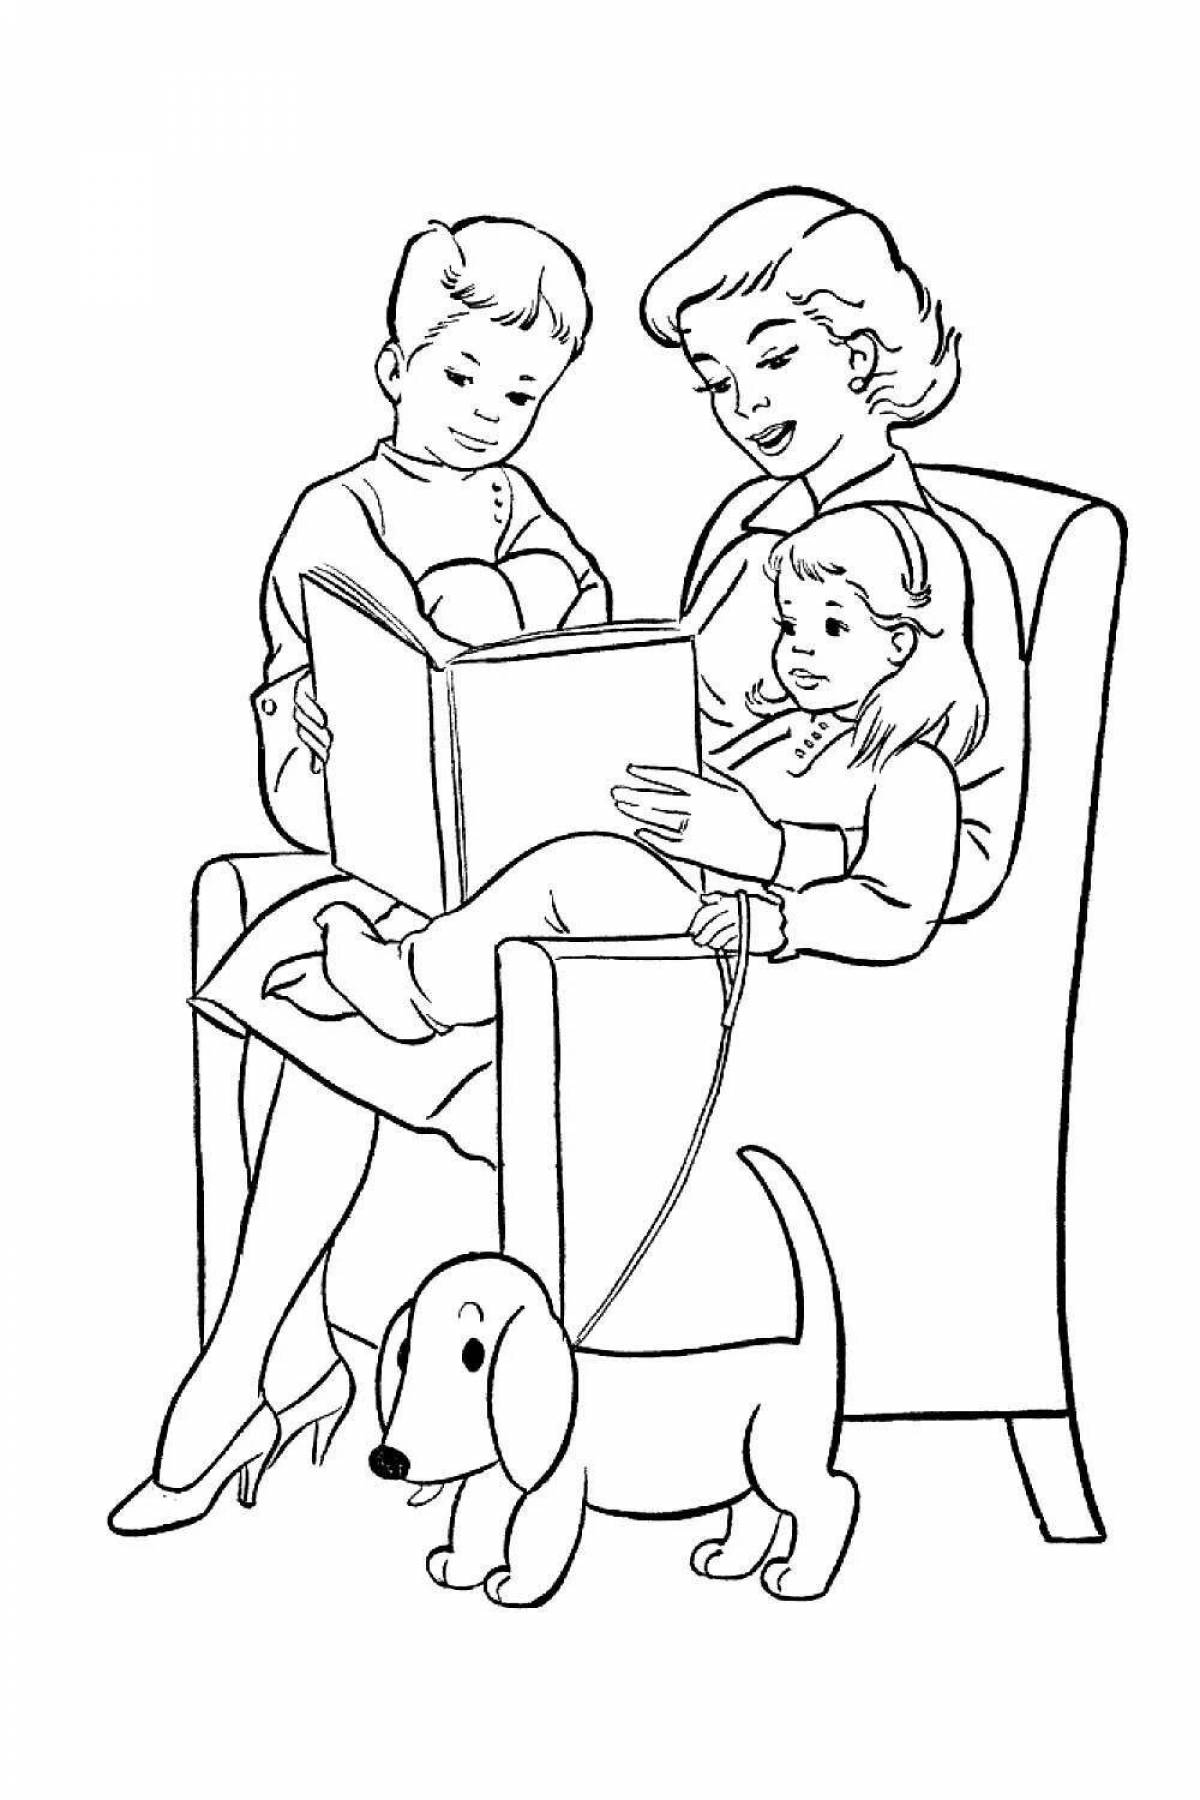 Coloring page violent son and mother